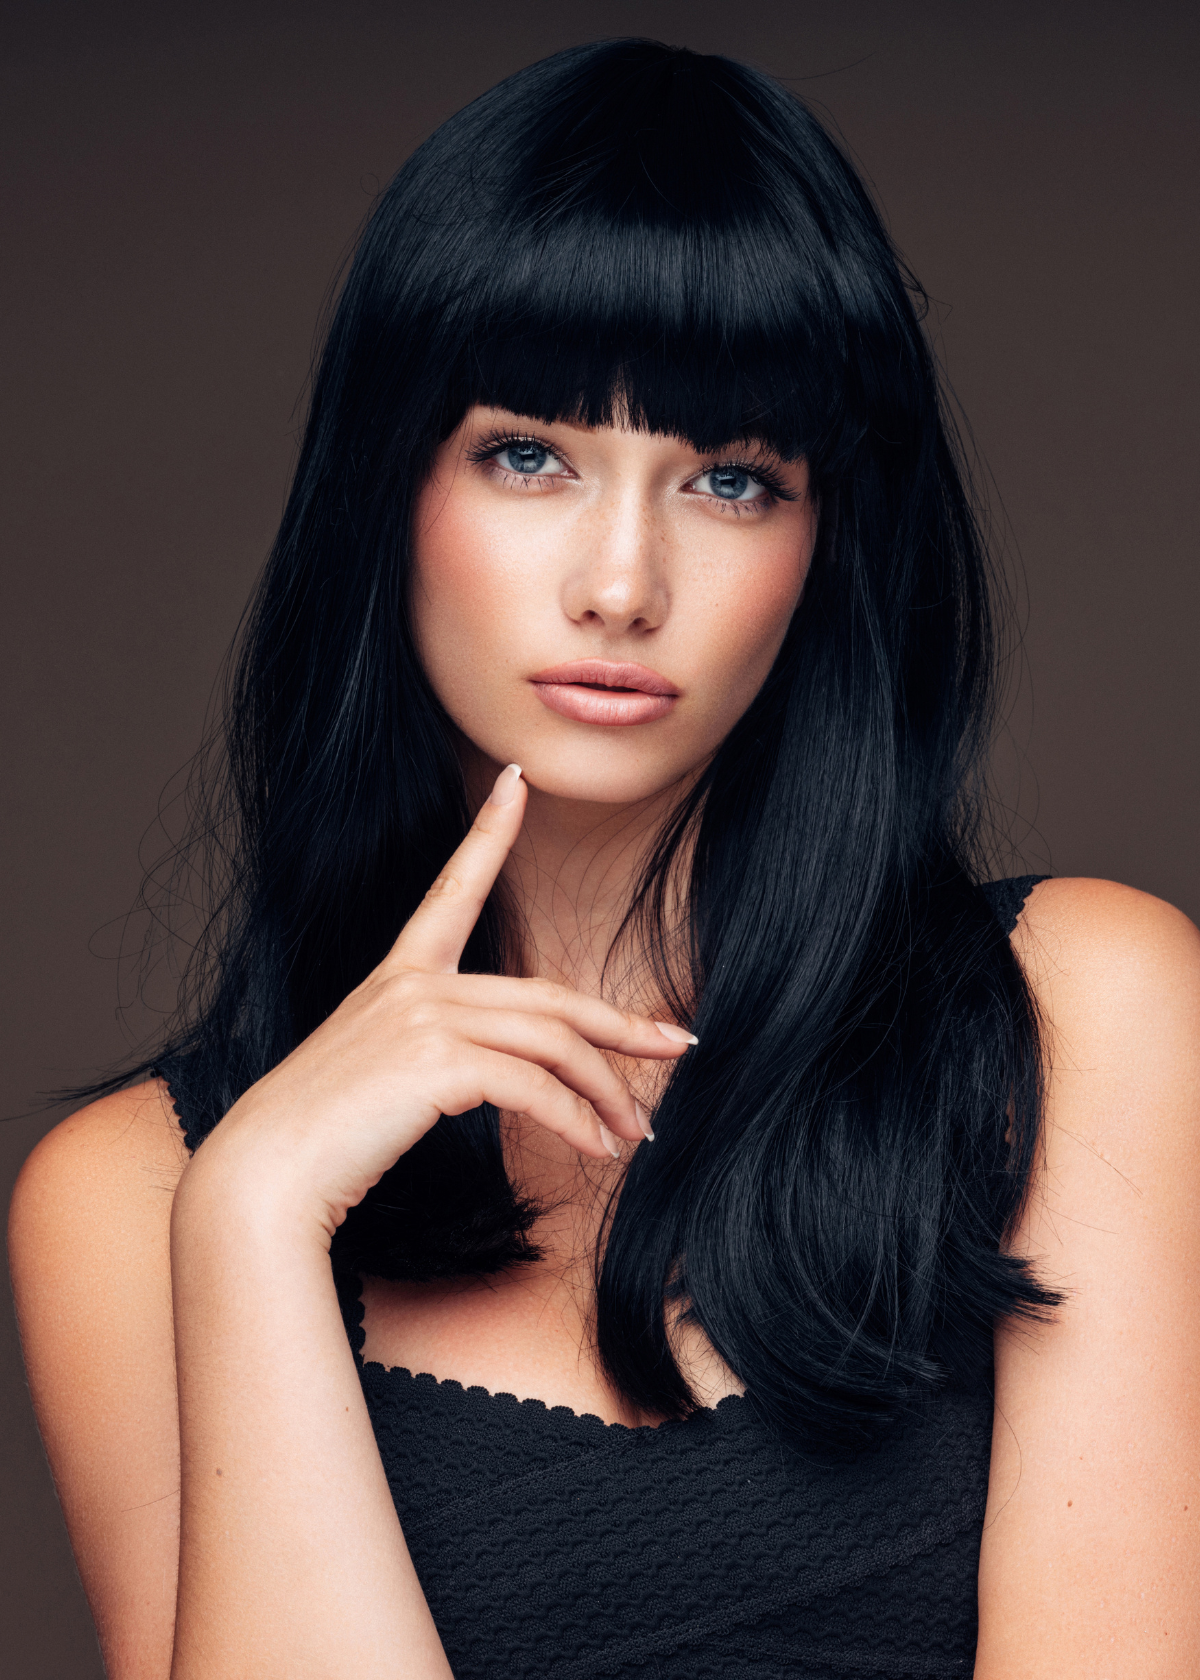 5 Best Blue Black Hair Dye: Tested and Reviewed